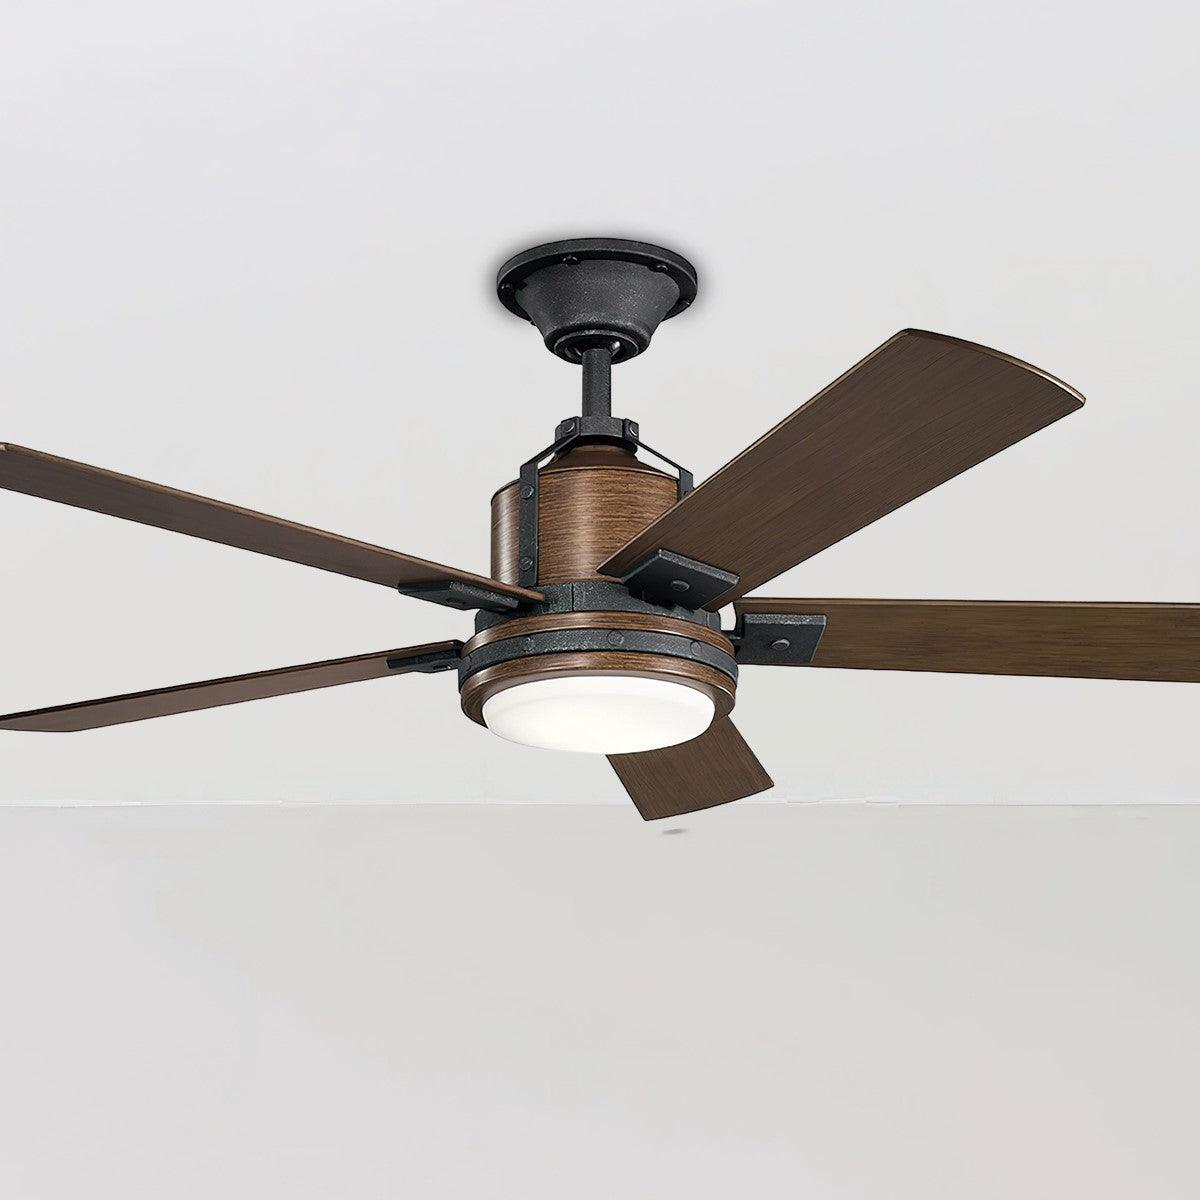 Colerne 52 Inch Rustic Ceiling Fan With Light, Wall Control Included